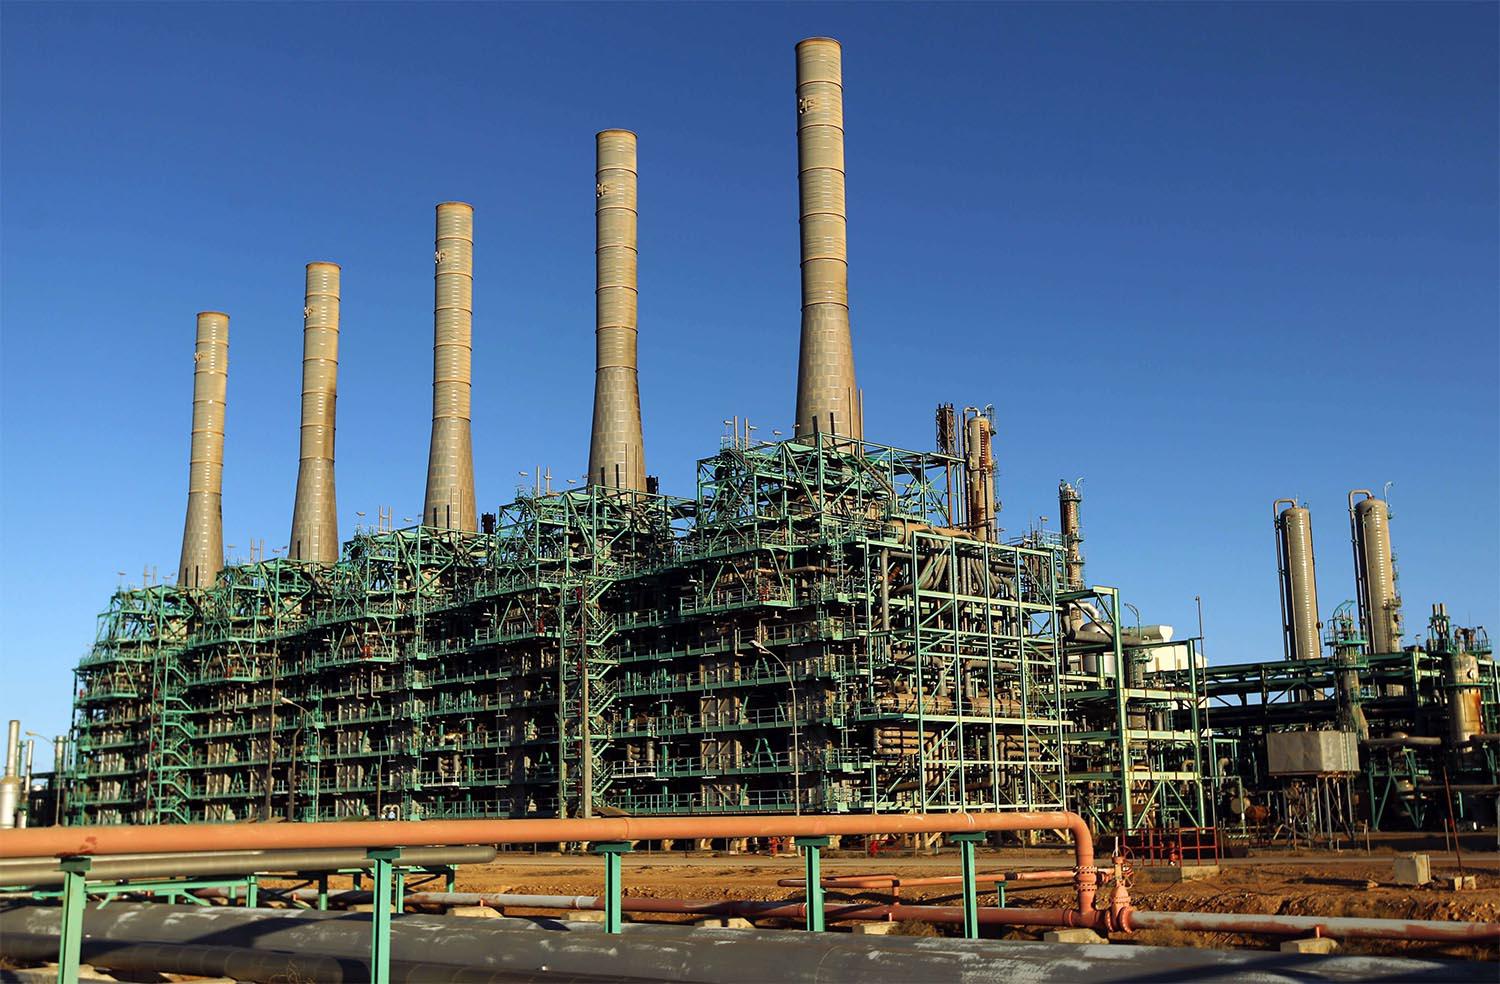 Oil refinery in Libya's northern town of Ras Lanuf